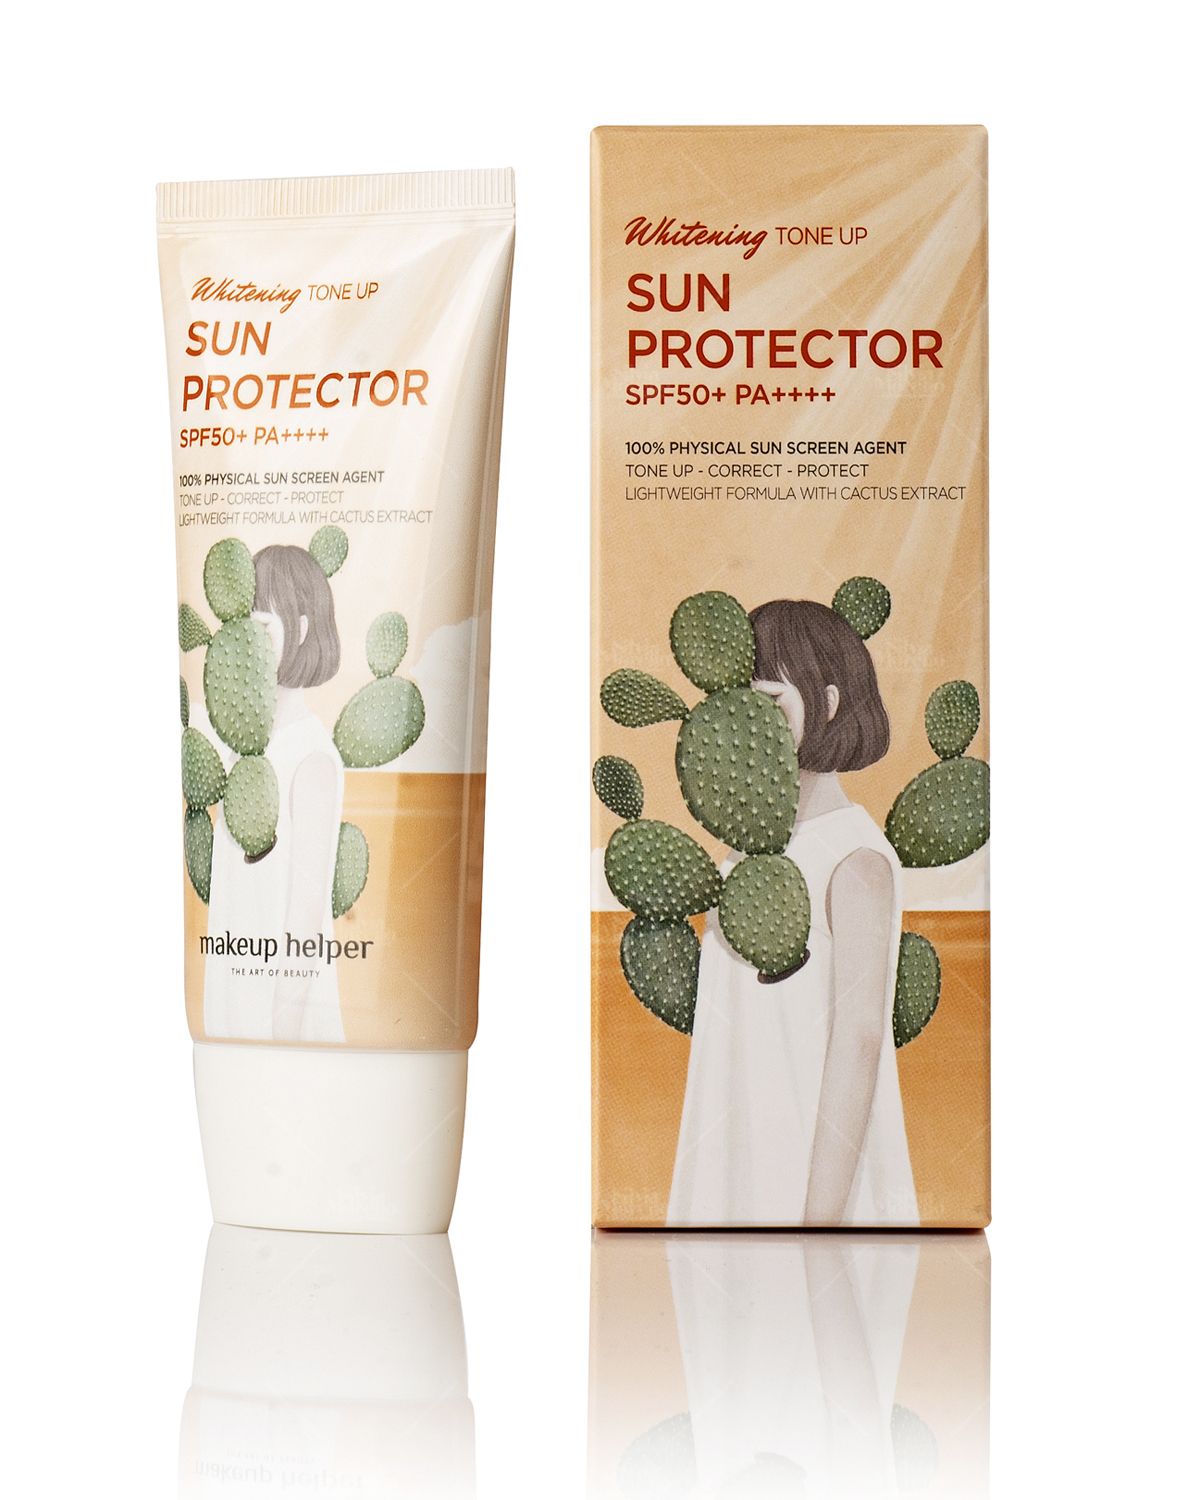 PROTECTOR SOLAR WHITENING TONE UP